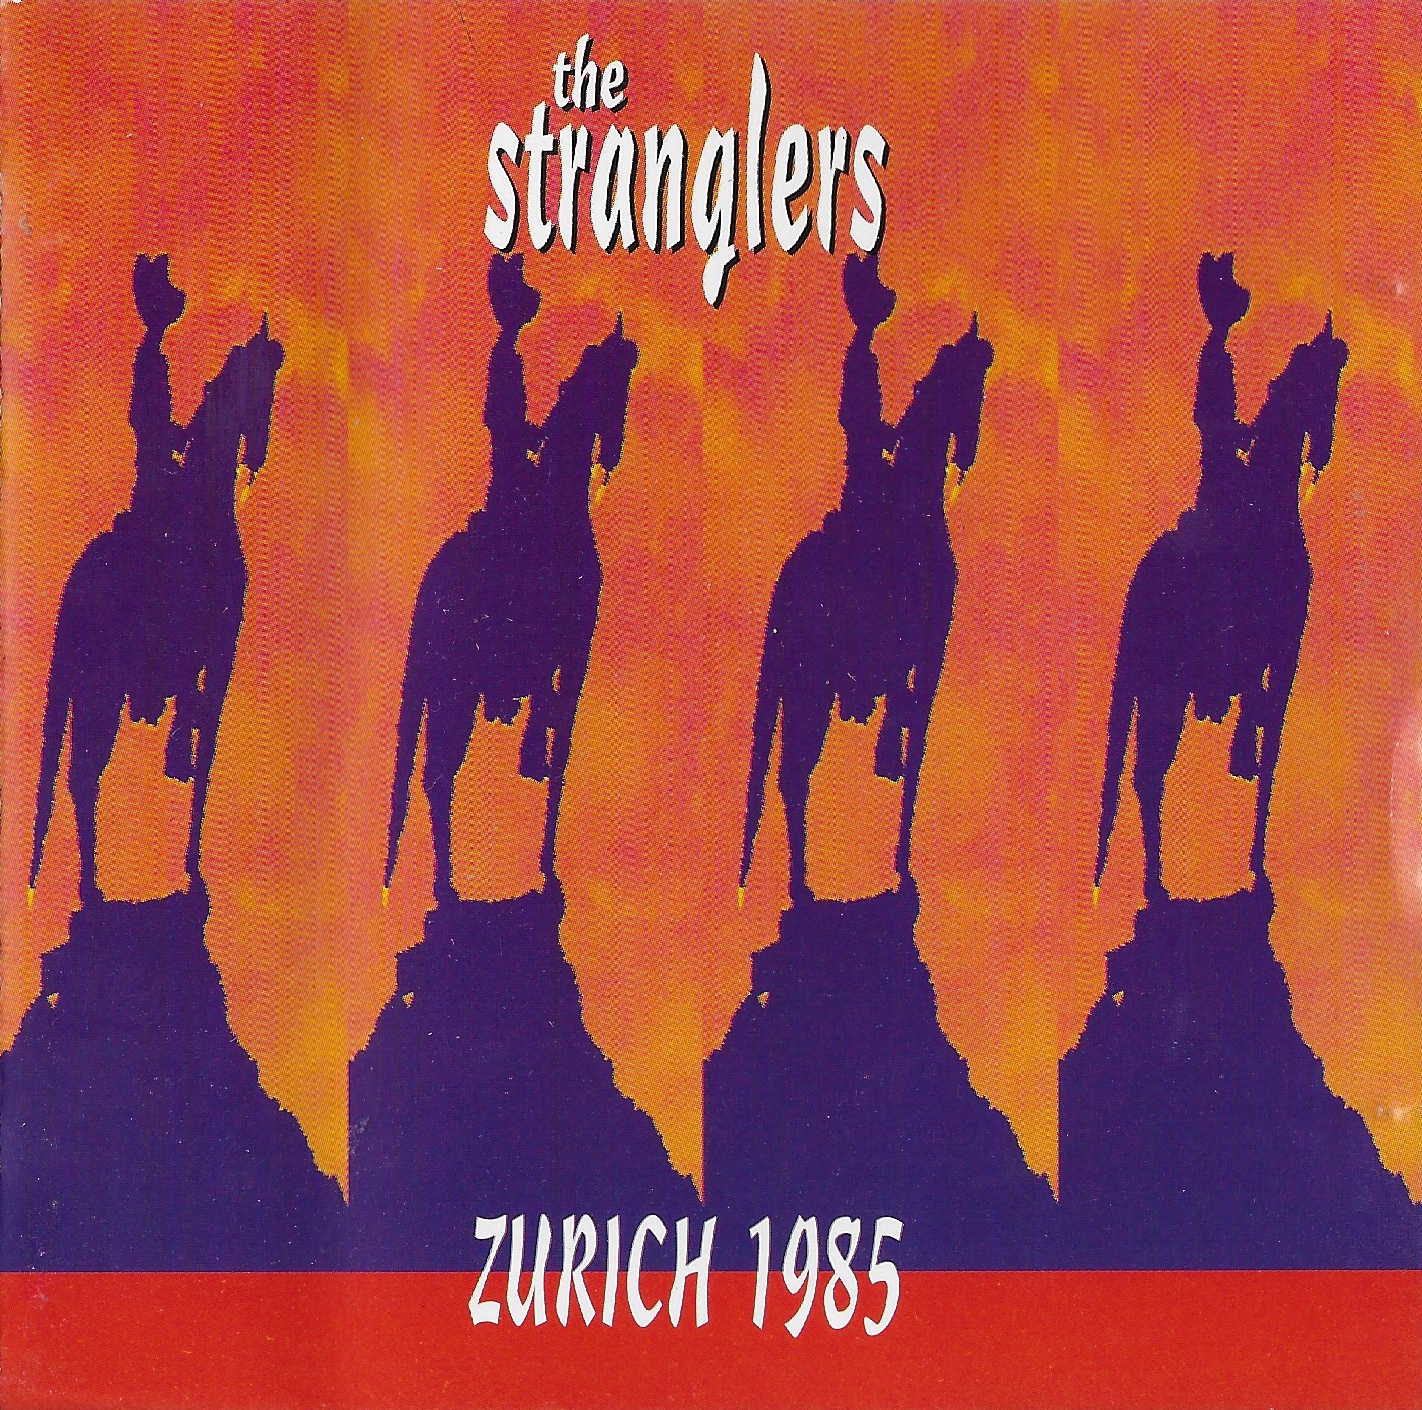 Picture of RFCD 1212 Zurich 1985 by artist The Stranglers from The Stranglers